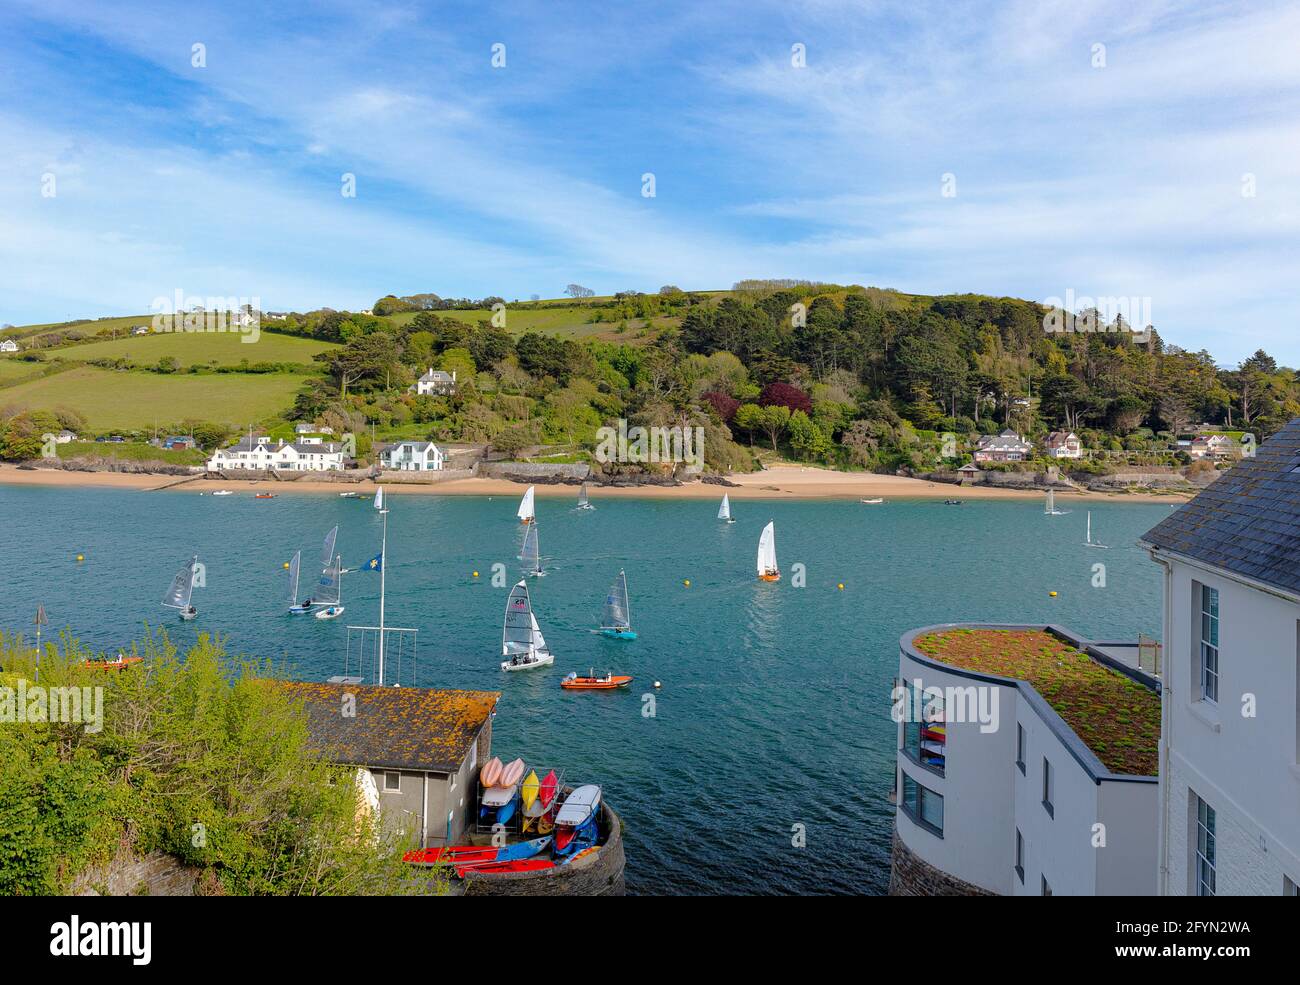 Sailing Dinghies on the estuary at the start of a race, Salcombe. South Devon, England Stock Photo